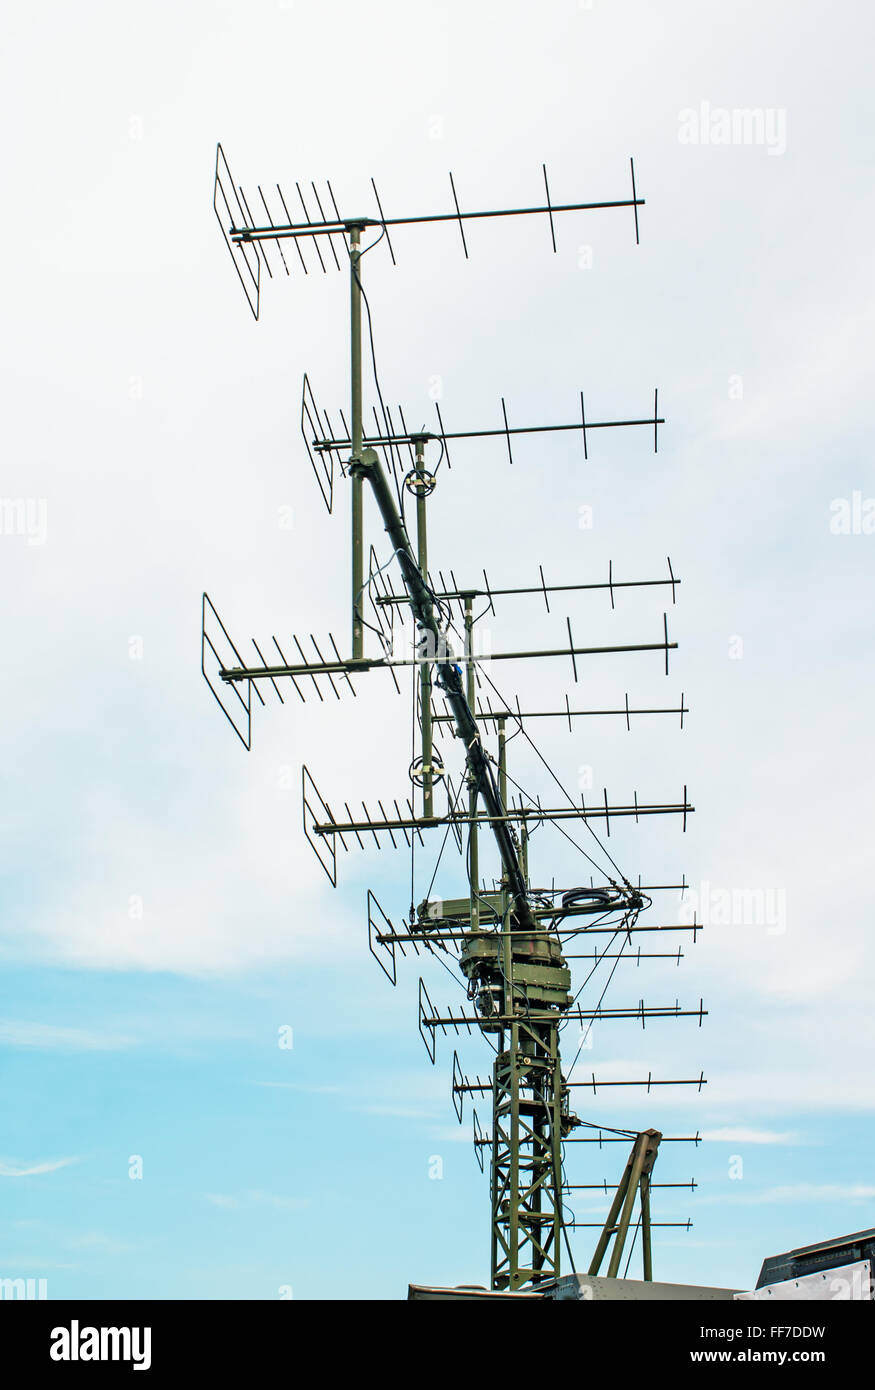 5th Belarusian military exhibition MILEX 2009 - 19-22 may 2009.Antenna from radar P-18T / TRS-2D Radar (meter band – A band). Stock Photo